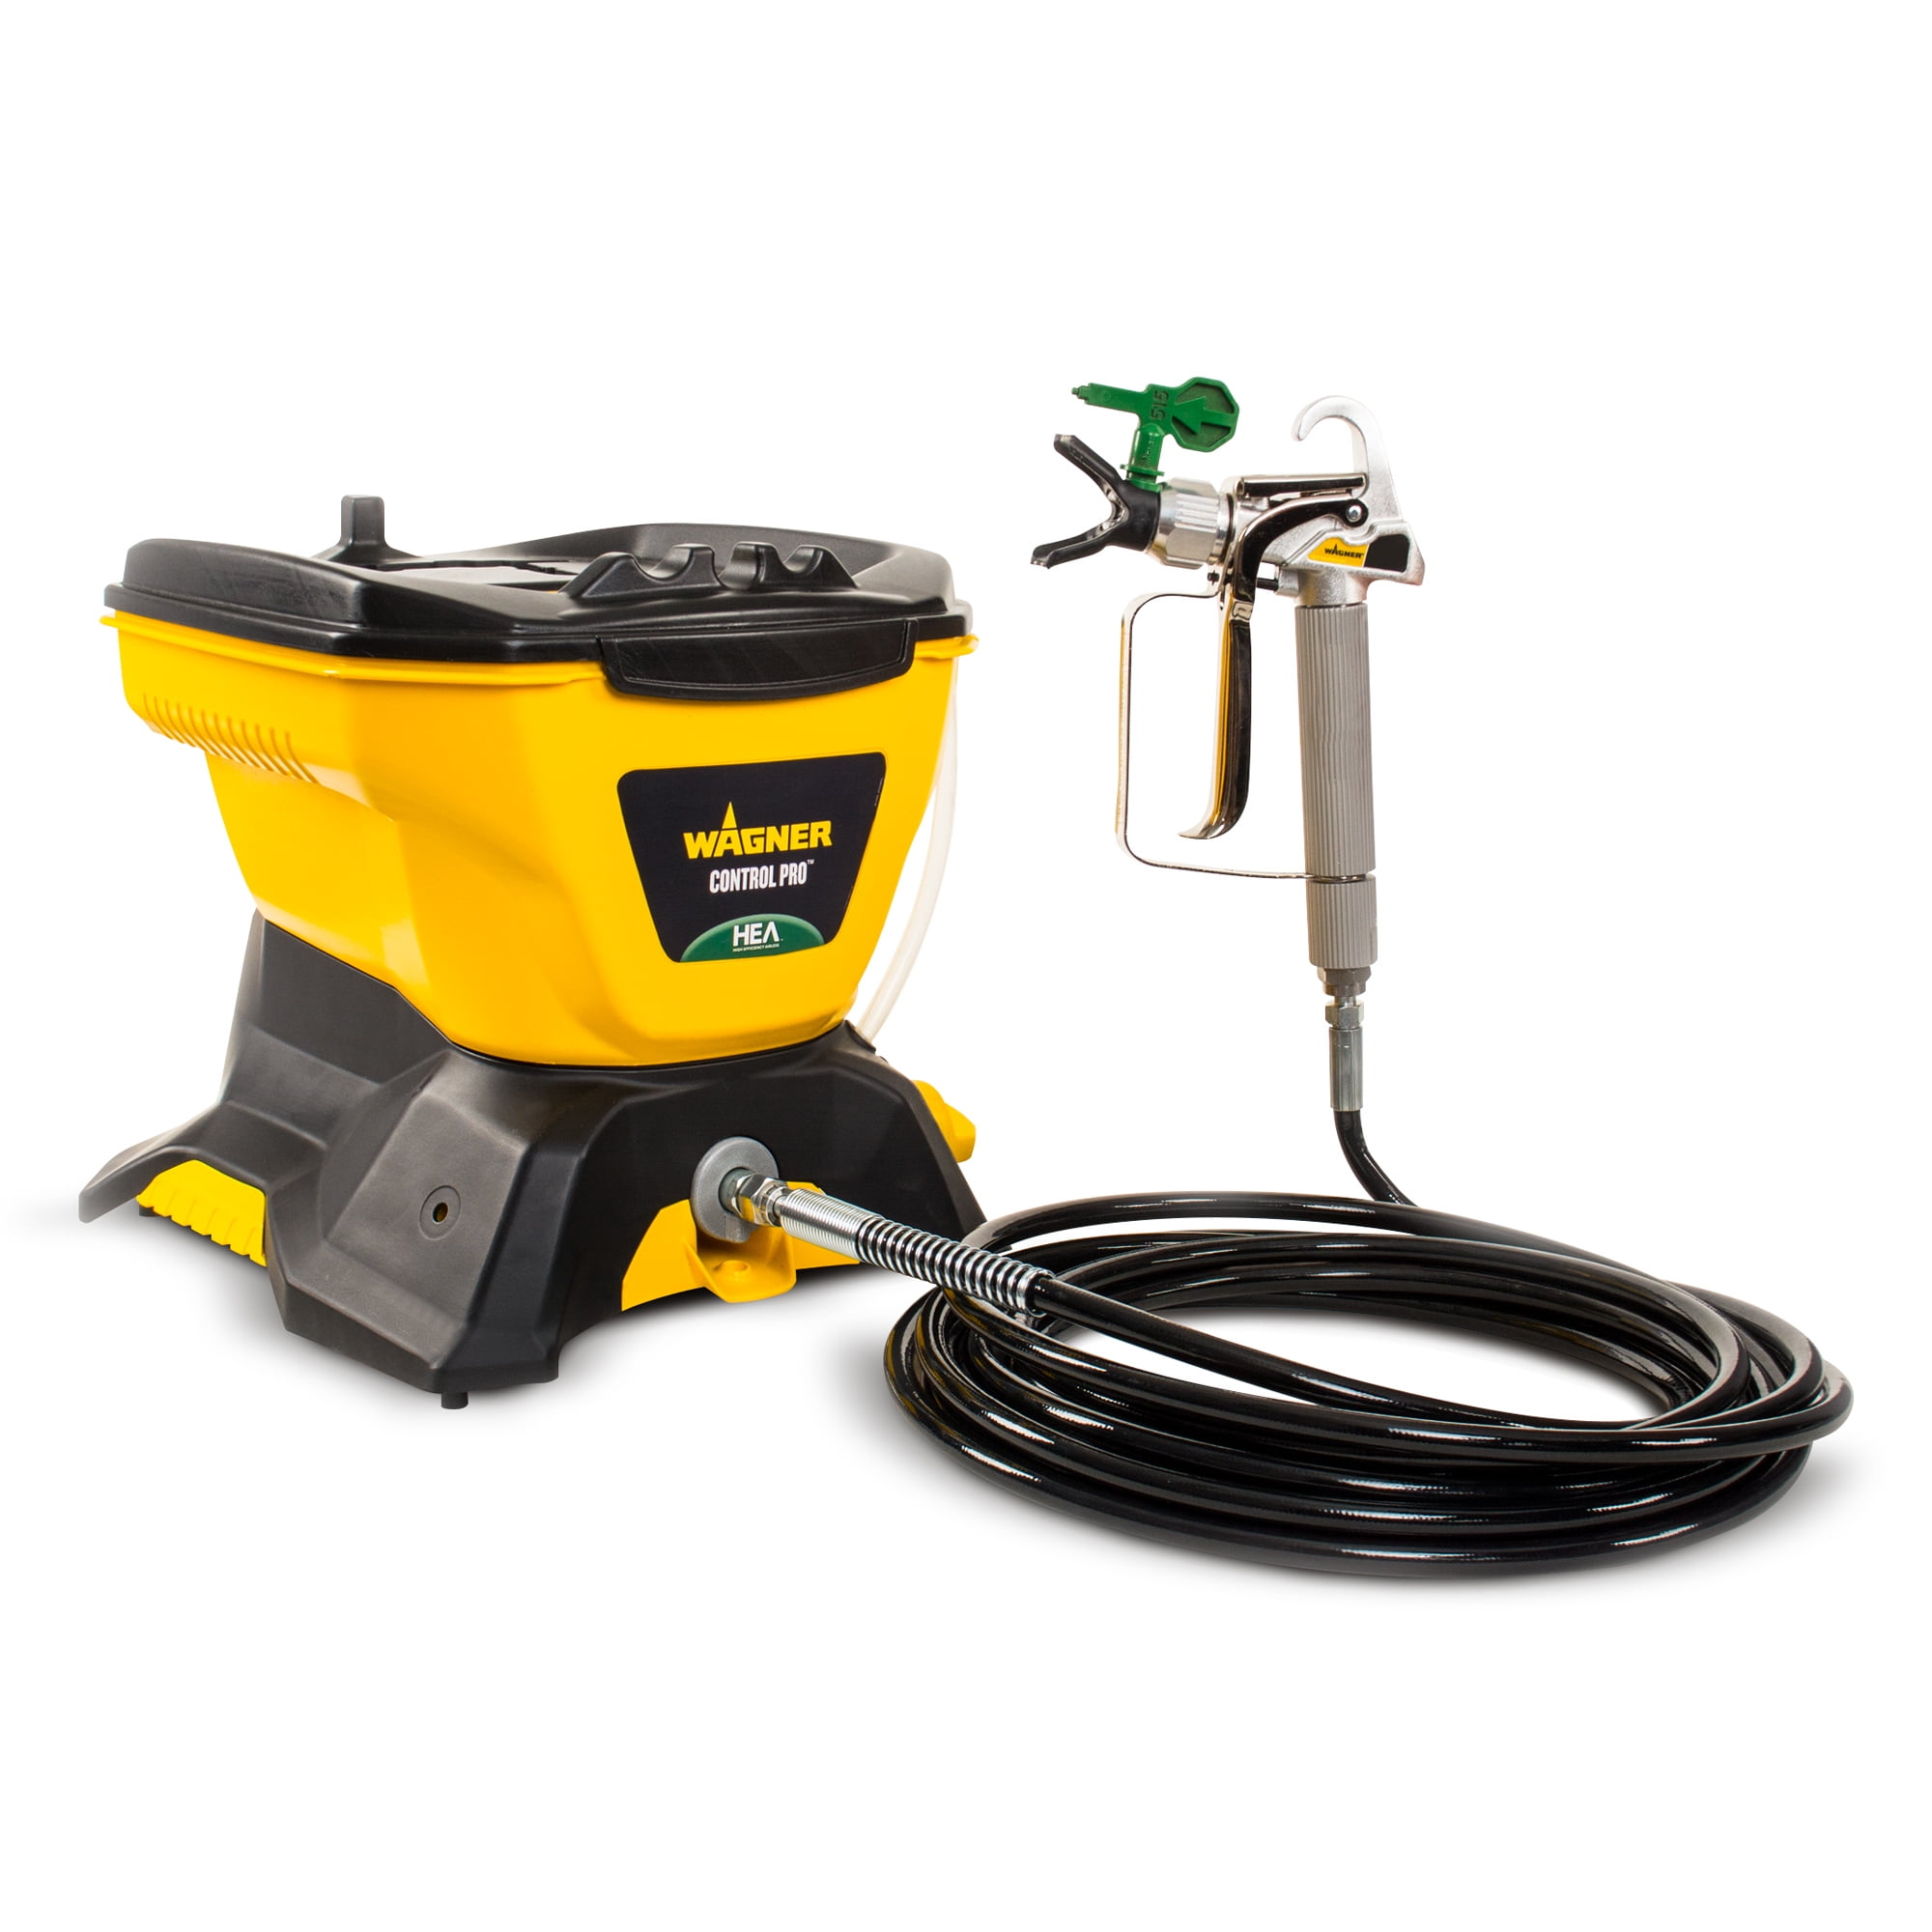 Wagner control pro 250M Airless paint spray system Professional